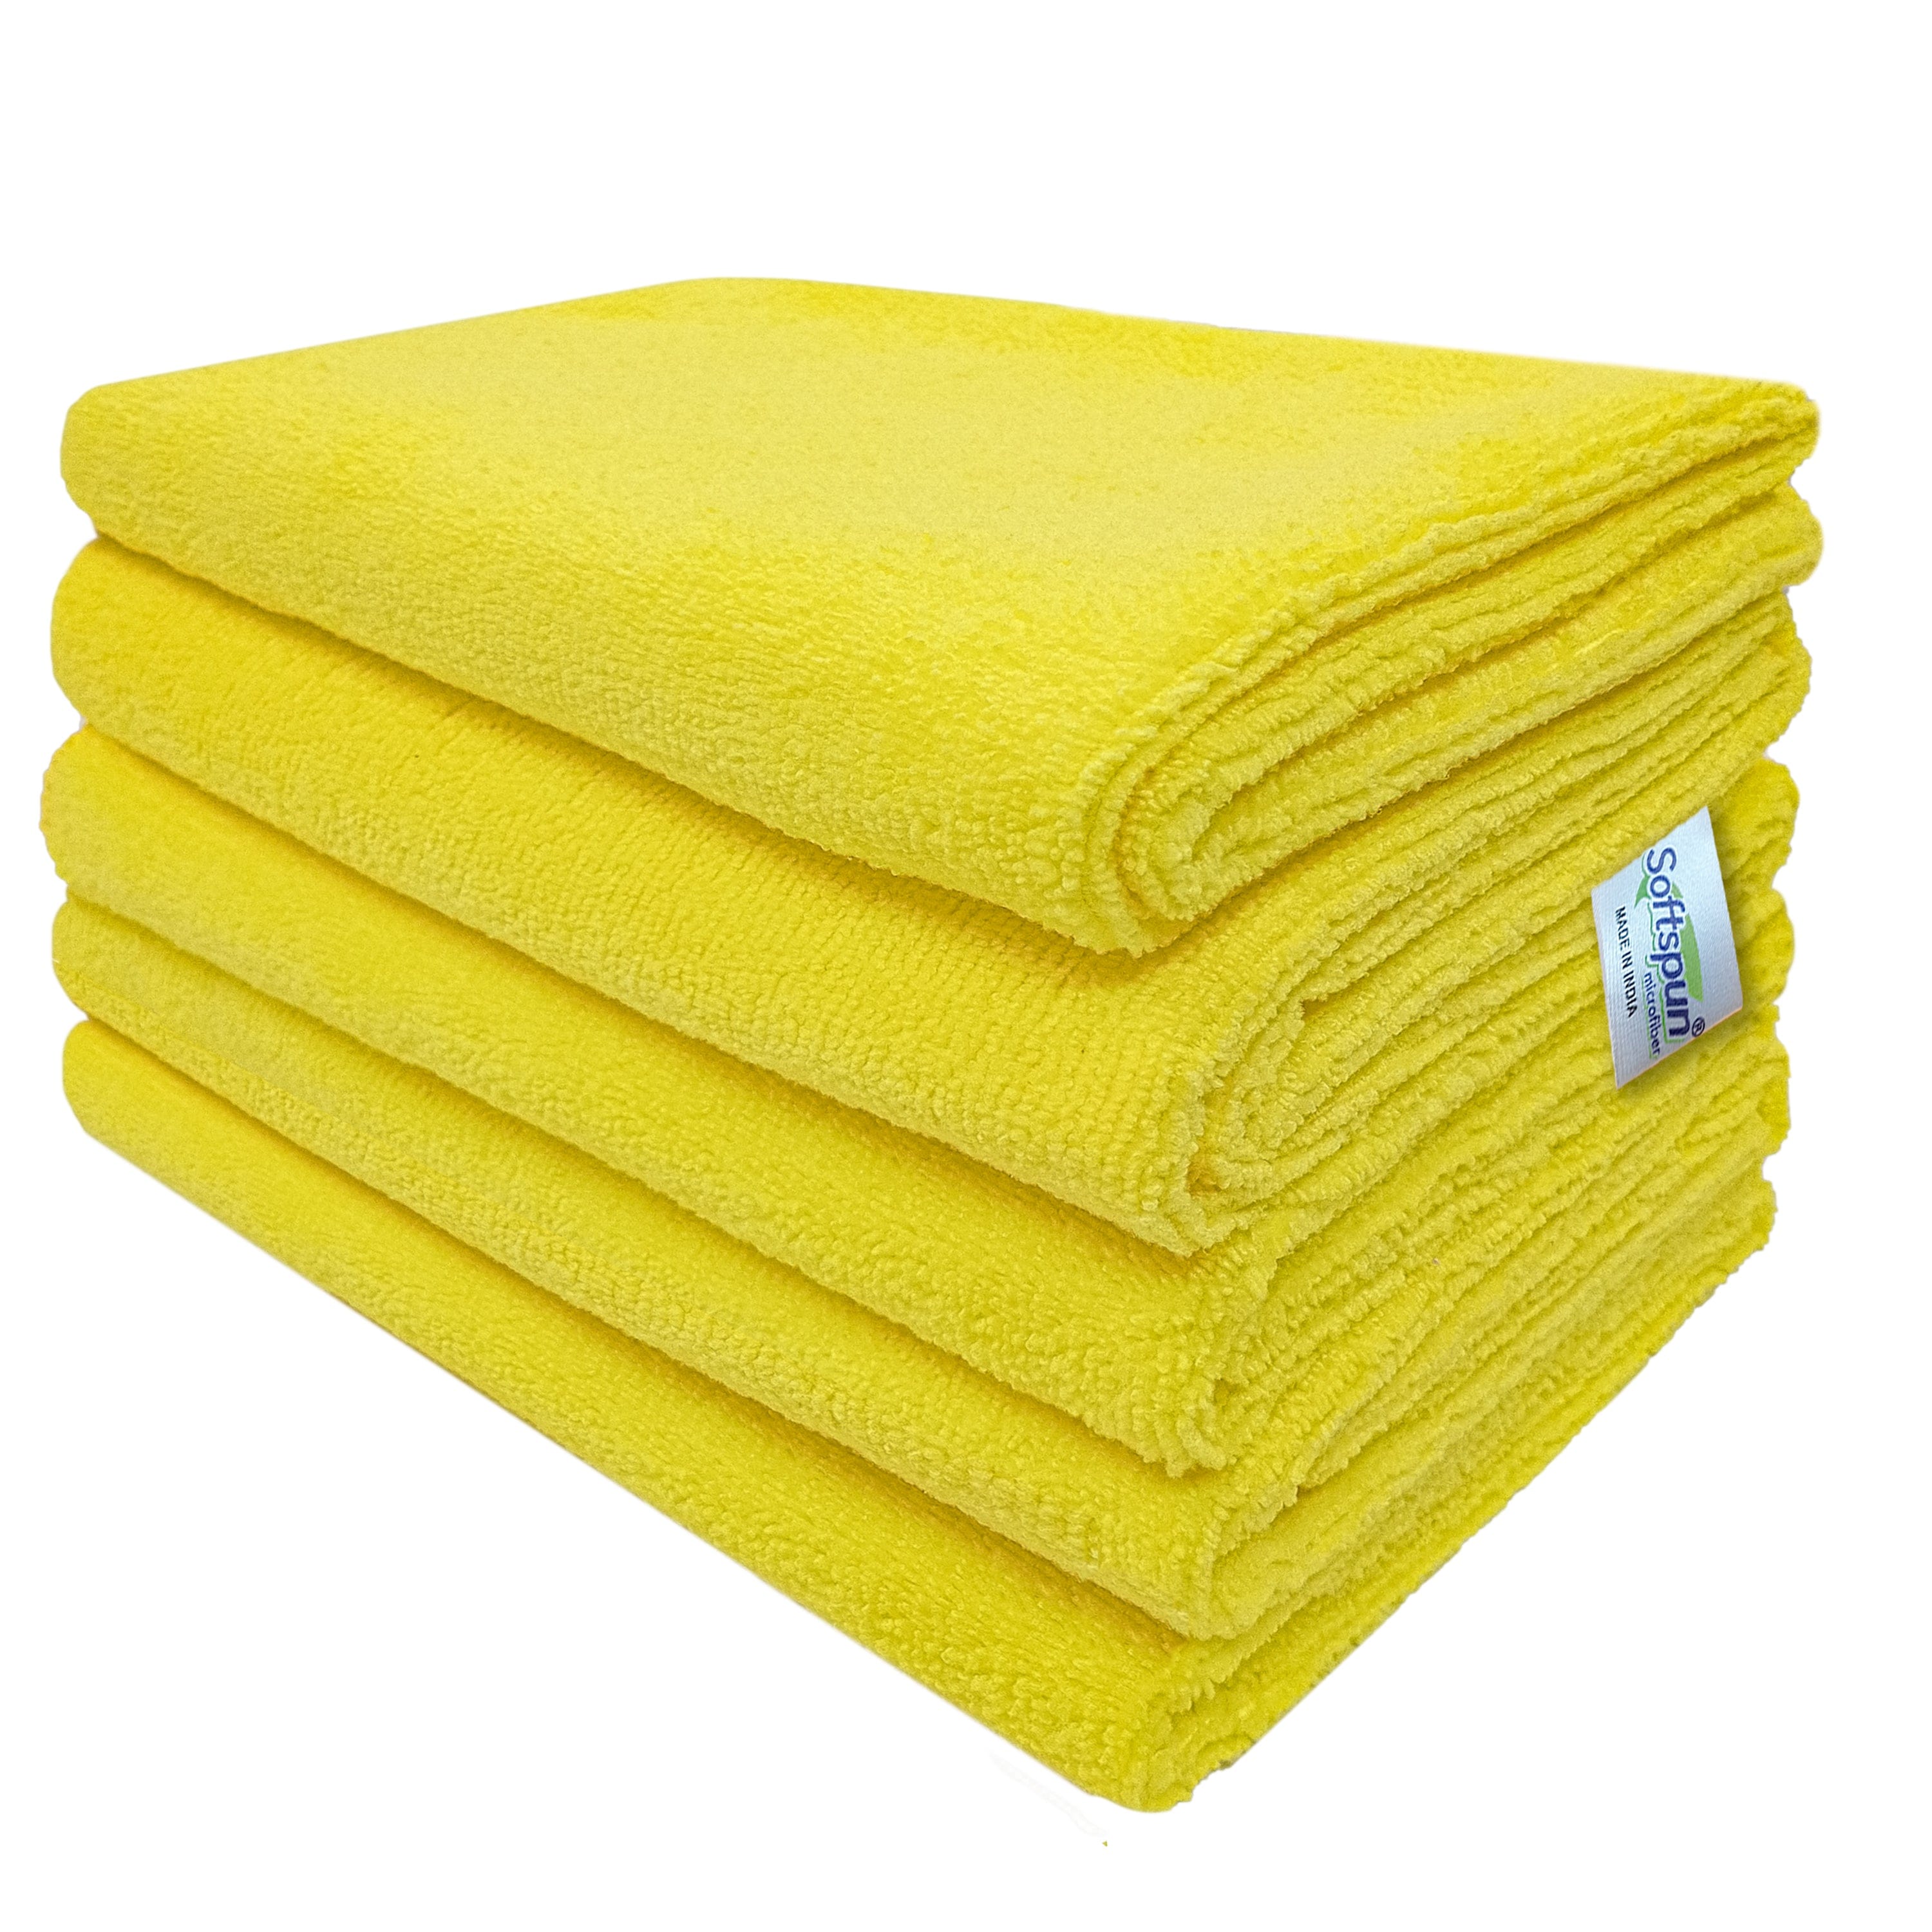 SOFTSPUN Microfiber Cleaning Cloths, 340 GSM Highly Absorbent, Lint and Streak Free, Multi - Purpose Wash Cloth for Kitchen, Car, Window, Stainless Steel, silverware.